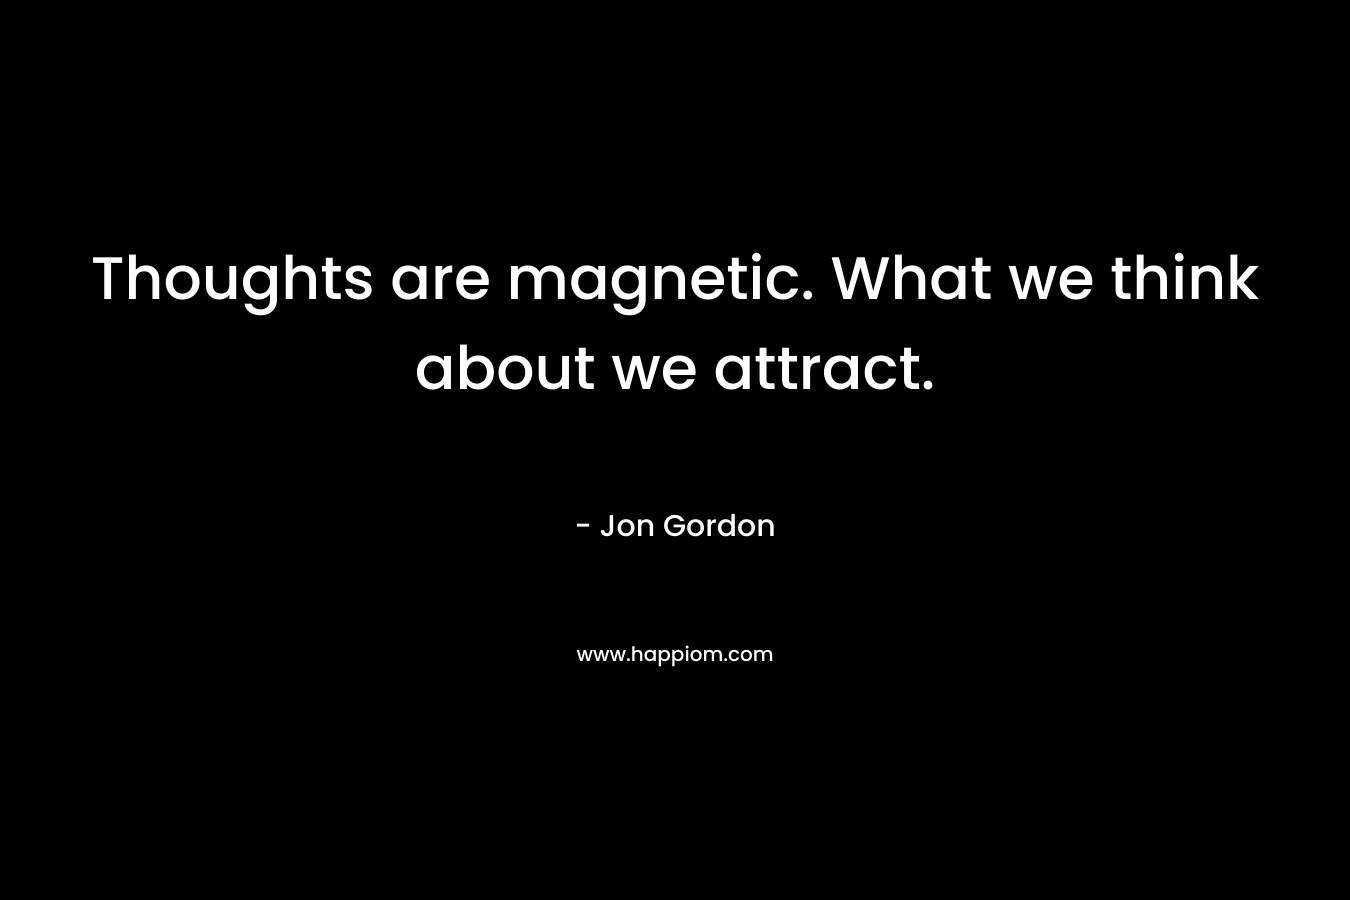 Thoughts are magnetic. What we think about we attract. – Jon Gordon